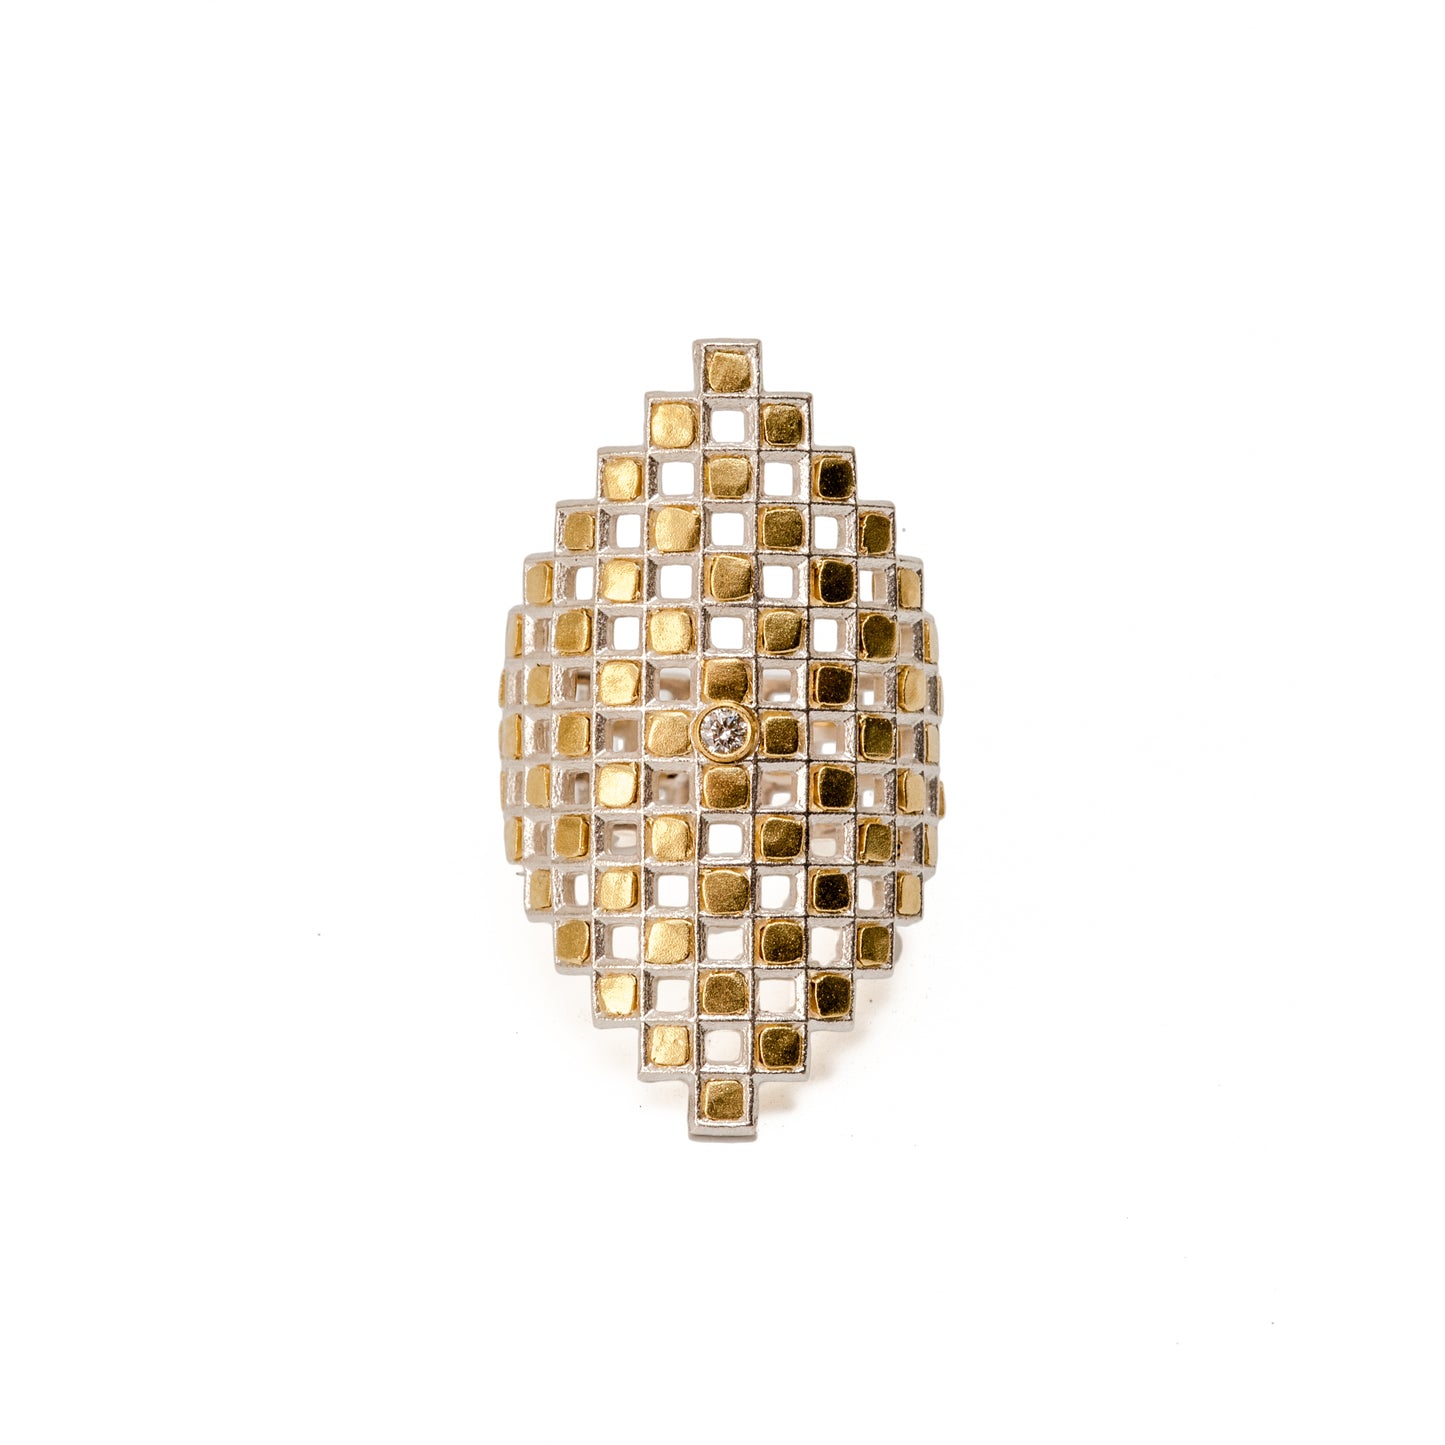 Lattice Ring with 18K Rivets; Checkerboard pattern